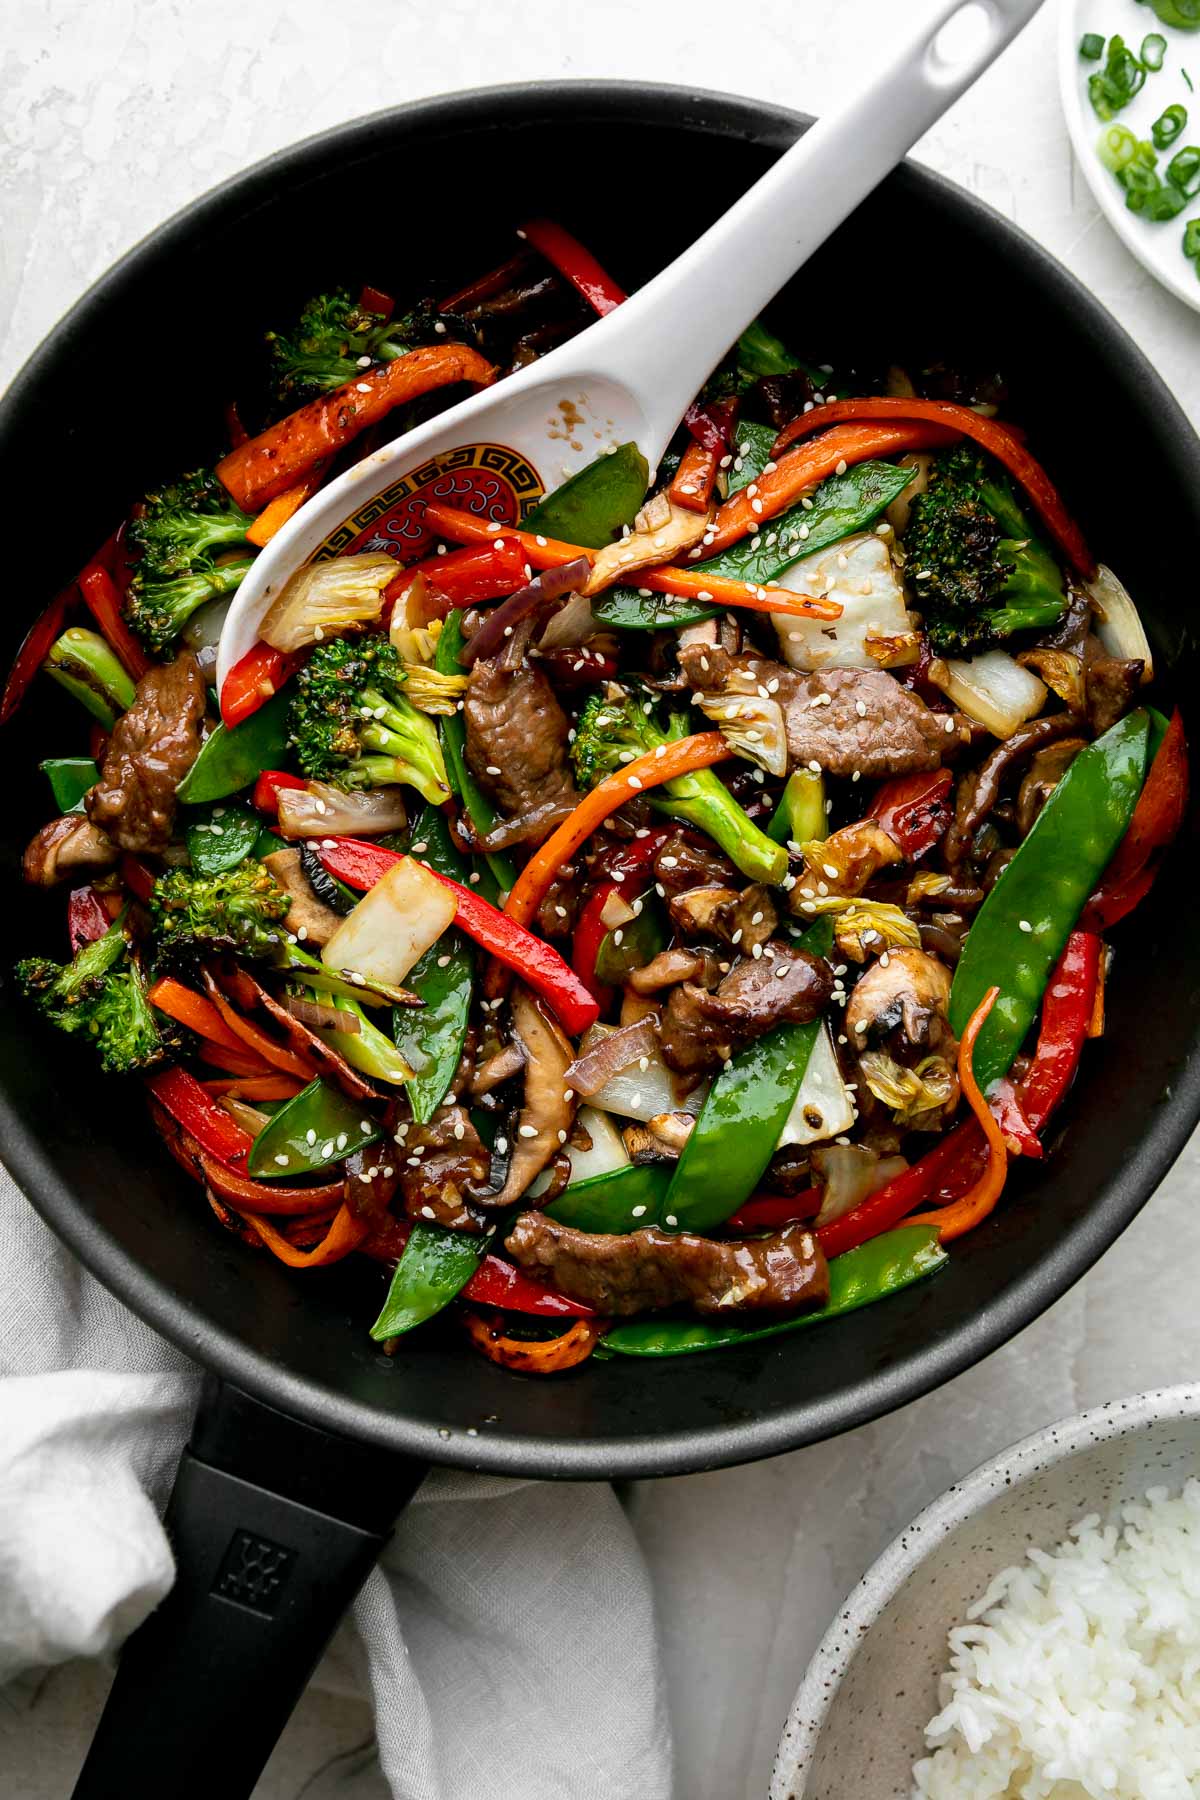 https://playswellwithbutter.com/wp-content/uploads/2022/02/Beef-and-Vegetable-Stir-Fry-15.jpg